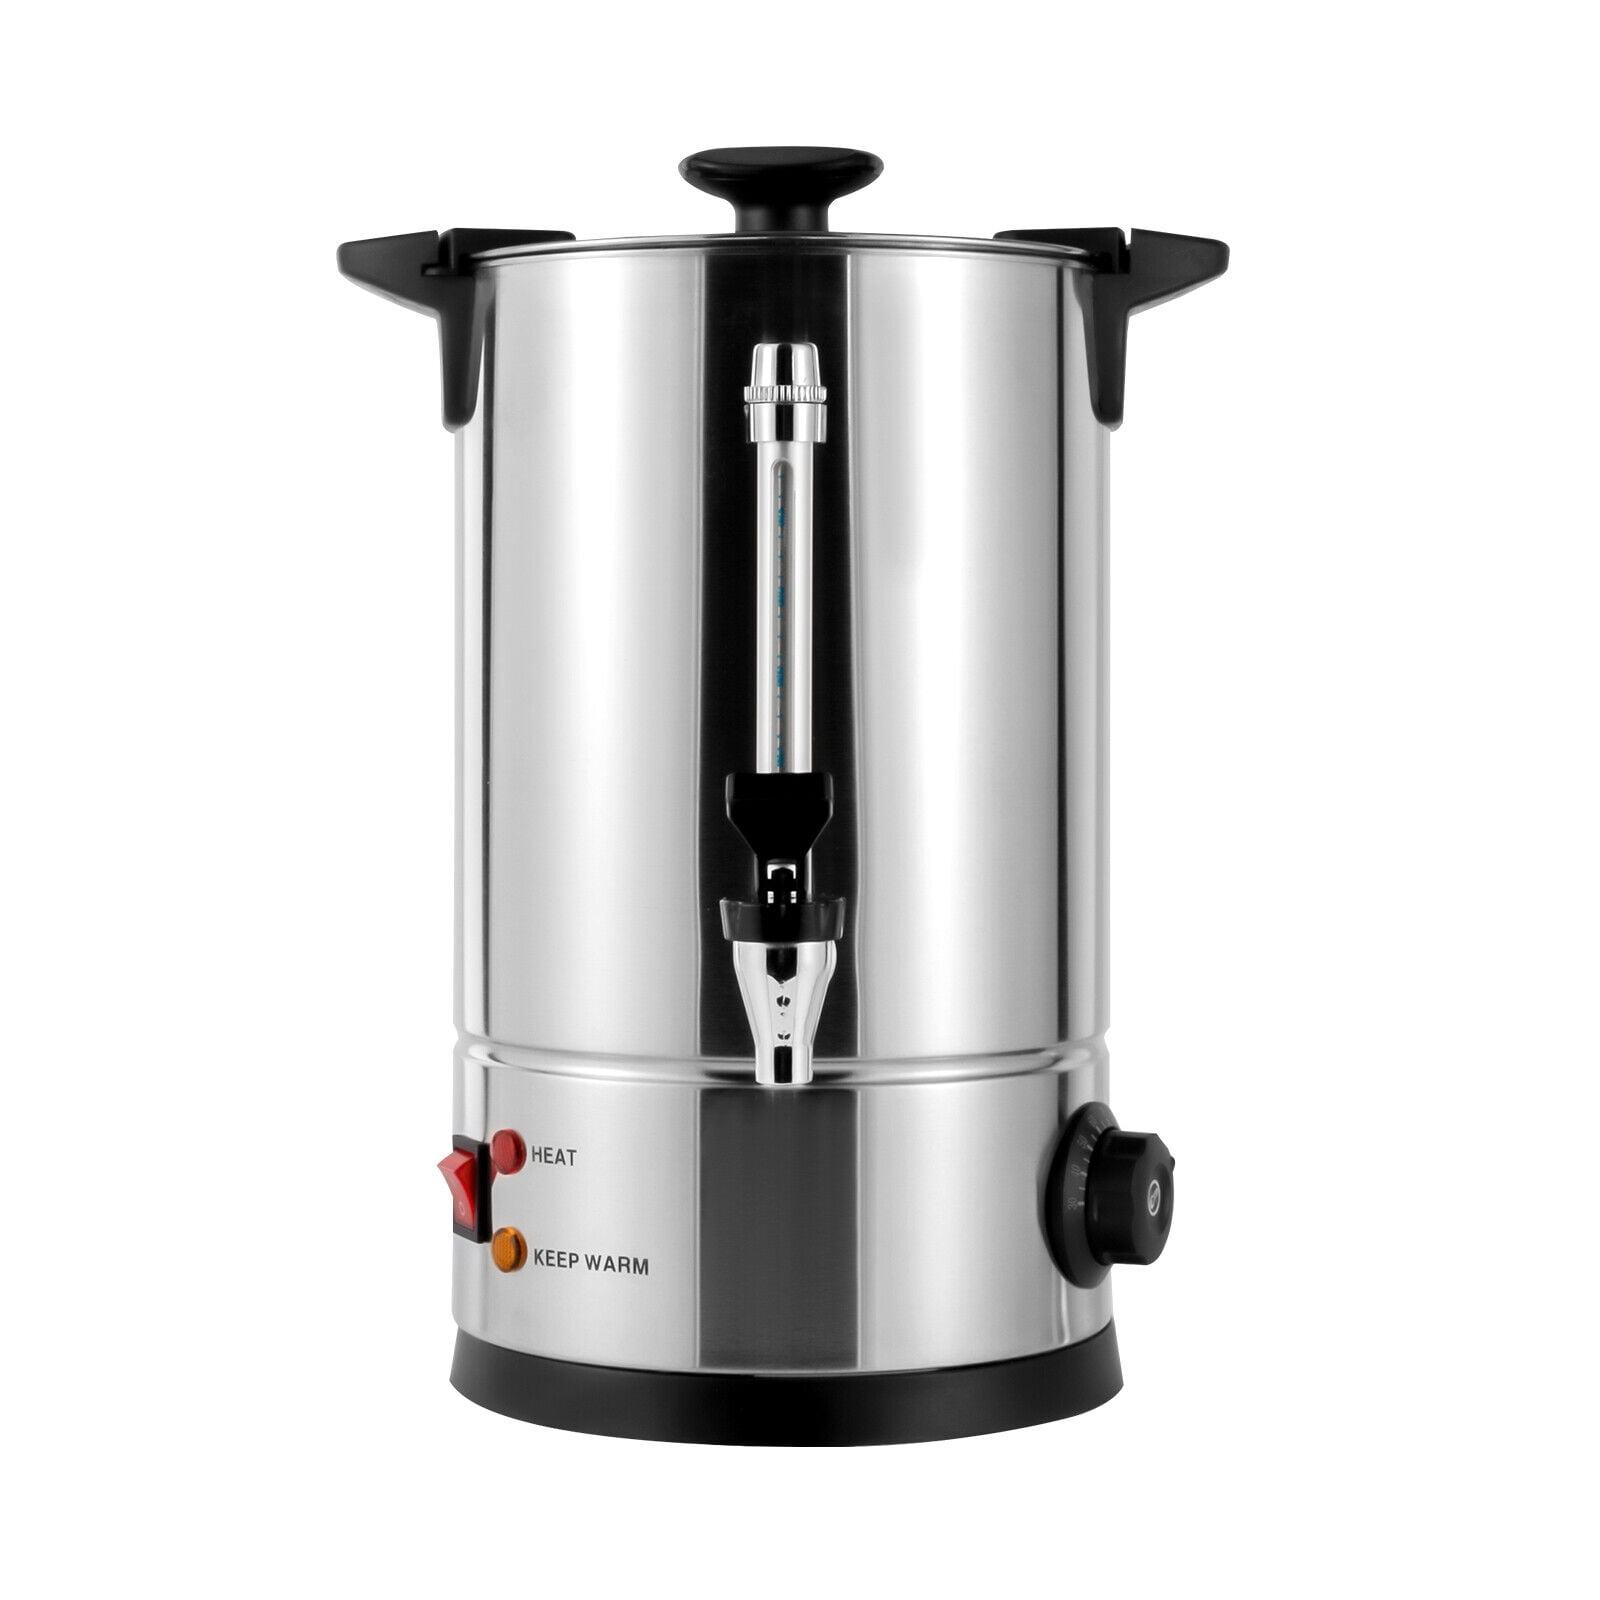 Winco EWB-50A Commercial Water Boiler, 50-Cup (8 Liter